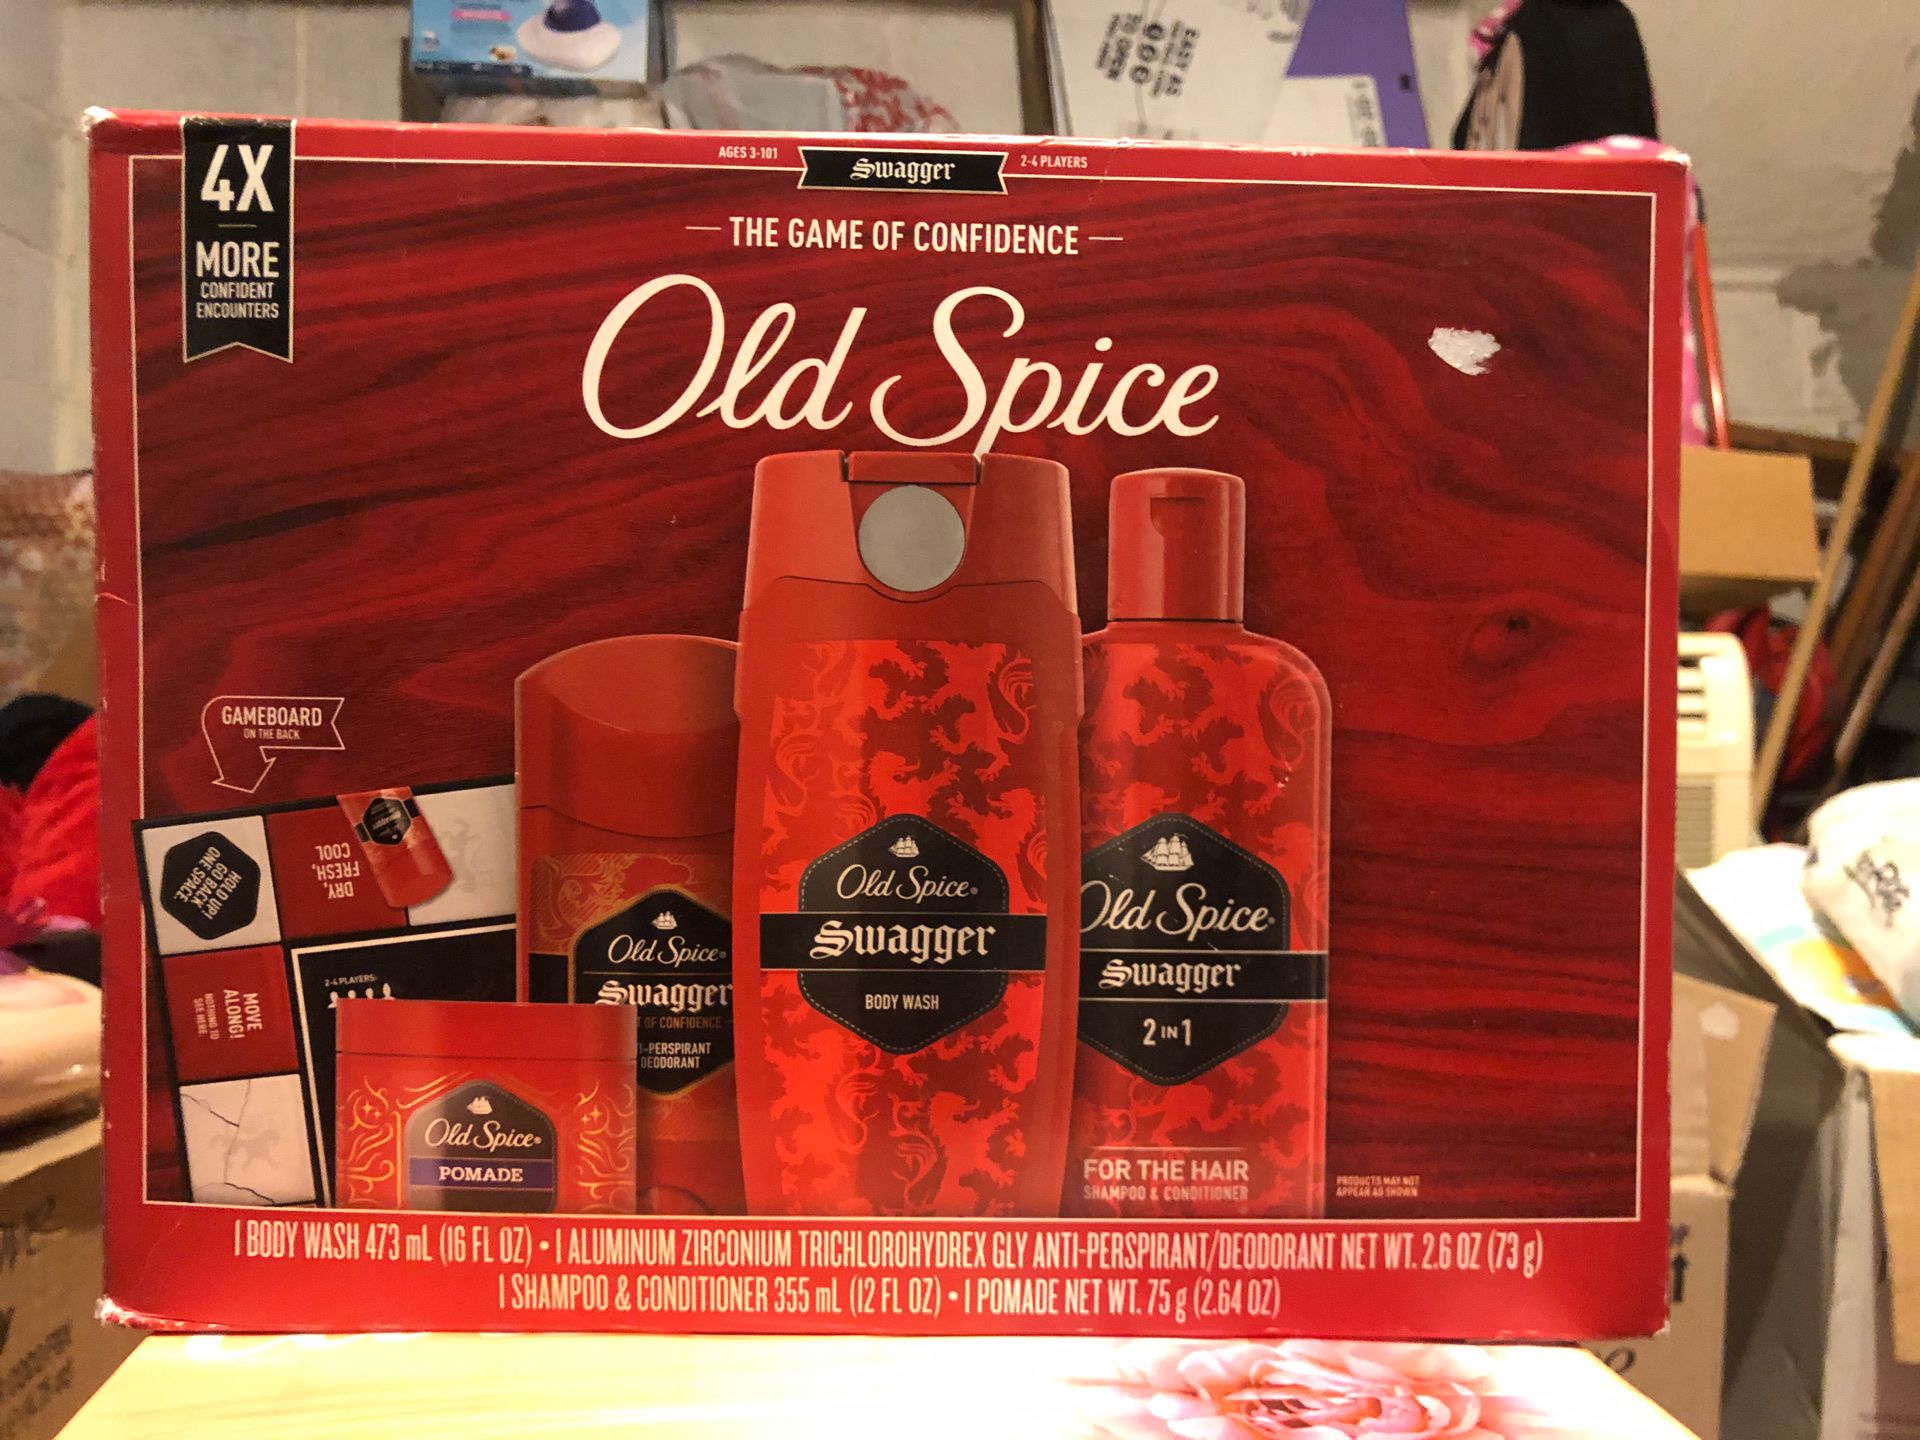 Old Spice set with 1 body wash, 1 deodorantk, 1 2 in 1 shampoo and conditioner, and 1 pomade